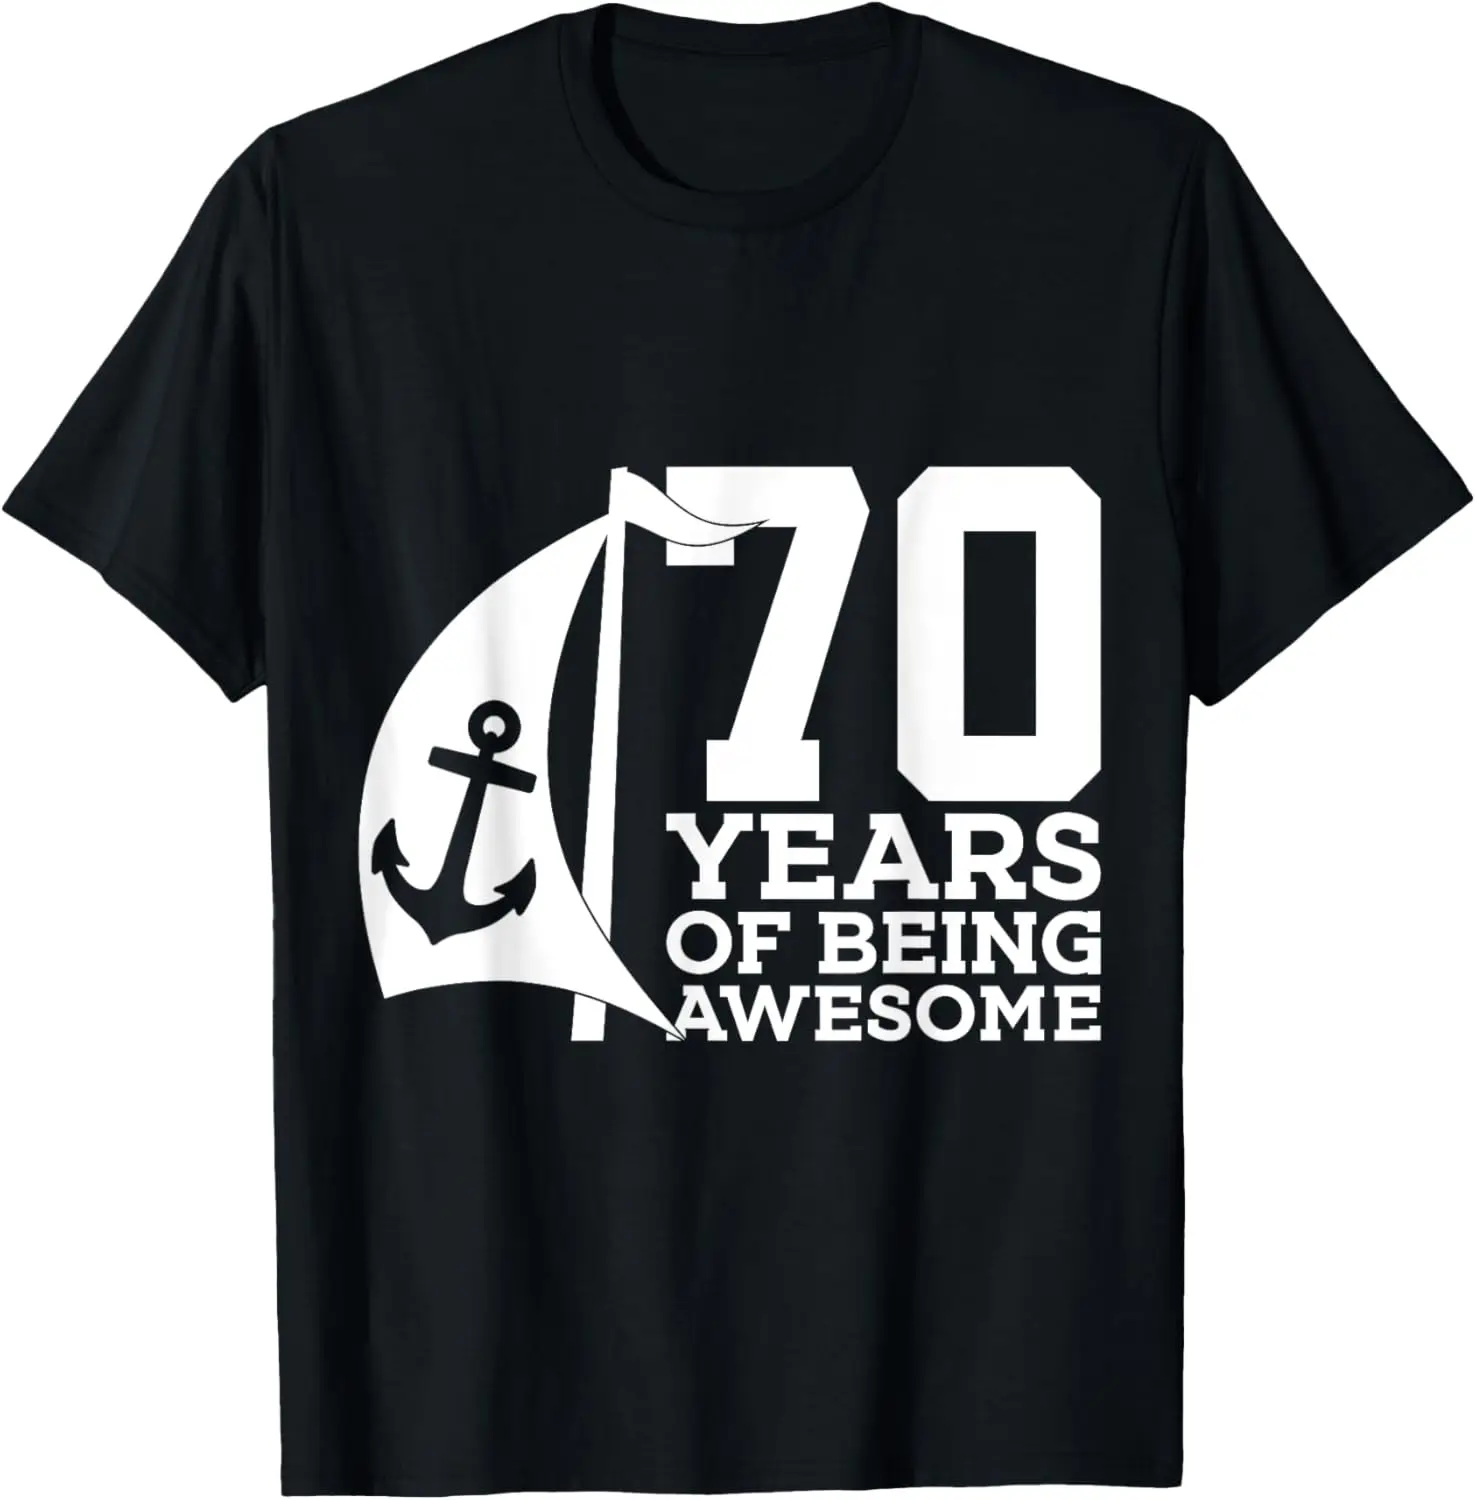 

Sailor 70 YEARS OF BEING AWESOME SAILING 70th BIRTHDAY BOAT T-Shirt